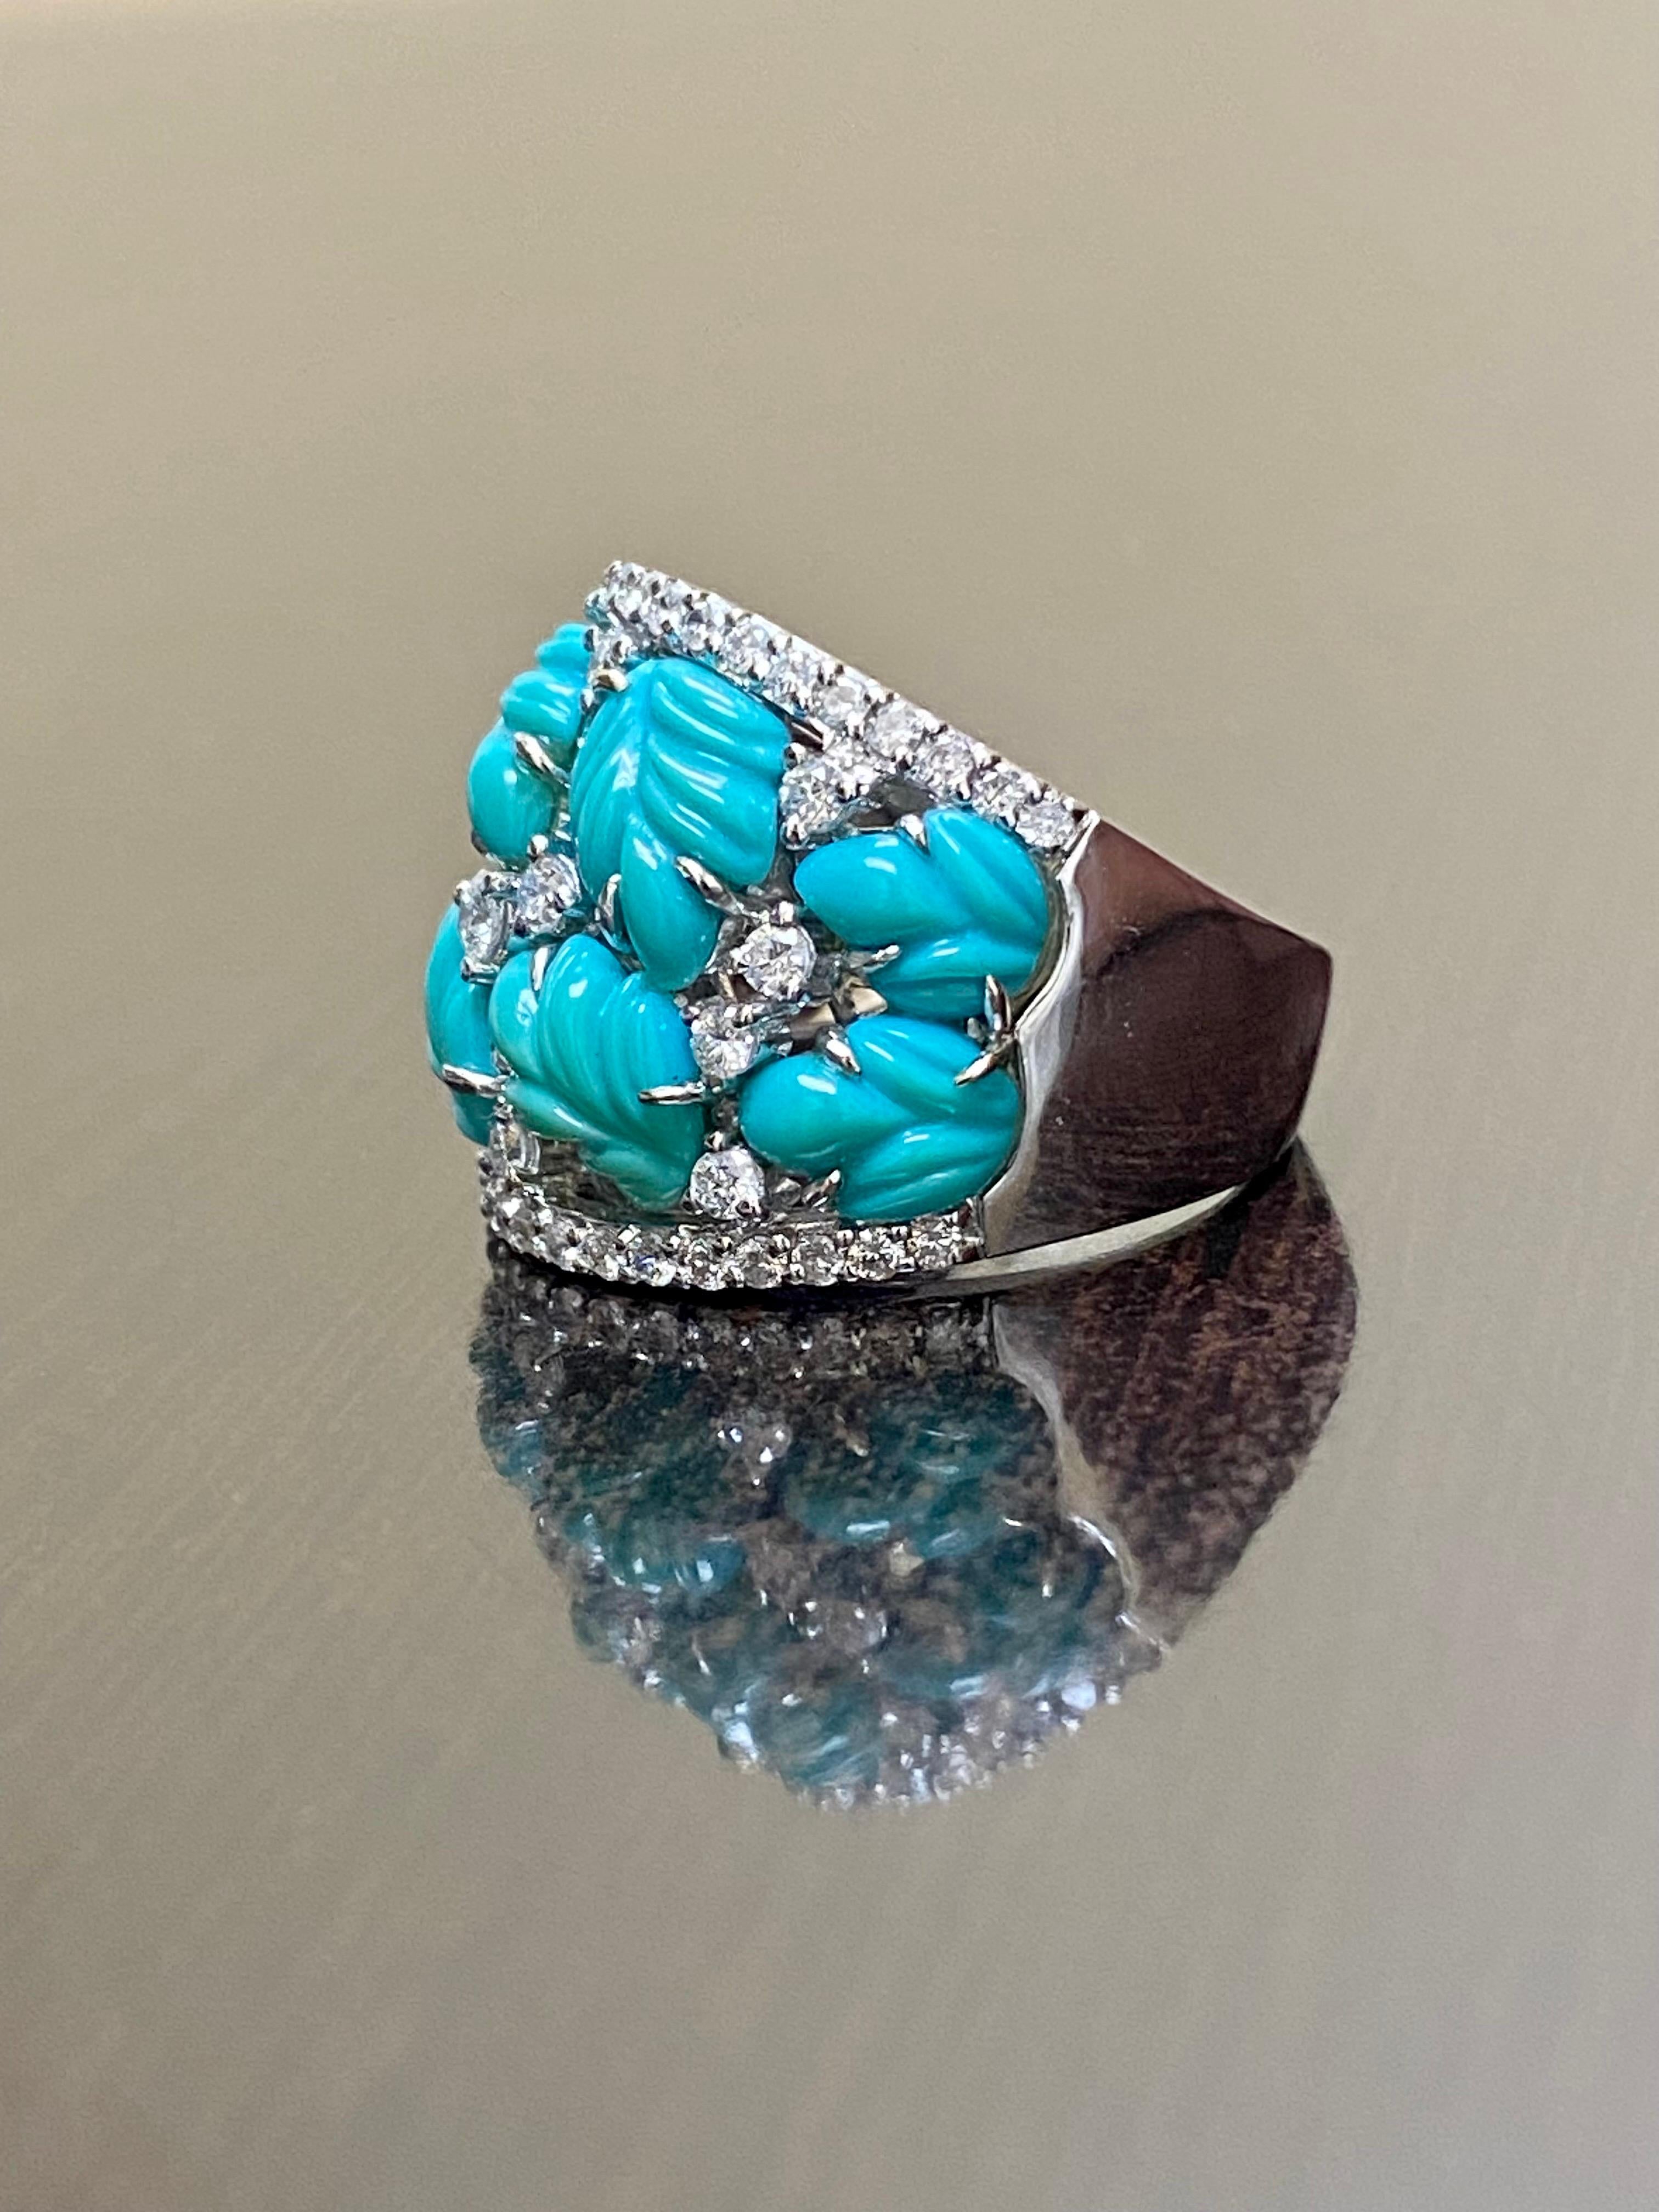 One of a Kind Handmade 18K White Gold Carved Turquoise Diamond Cocktail Ring For Sale 2